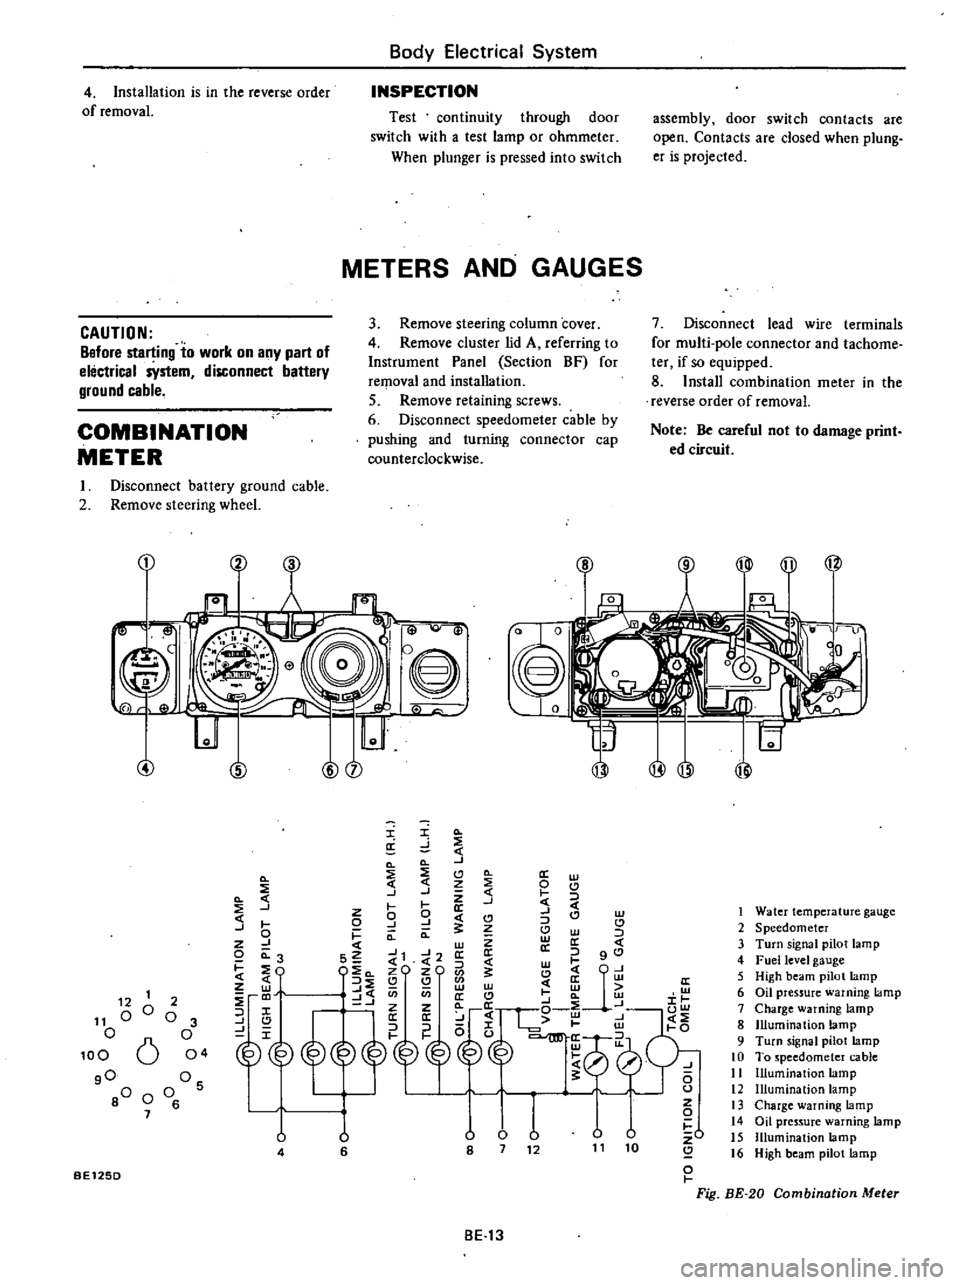 DATSUN 210 1979  Service Manual 
Body 
Electrical

System

INSPECTION
4 
Installation 
is 
in 
the

reverse 
order

of 
removal

Test

continuity 
through 
door

switch 
with 
a 
test

lamp 
or

ohmmeter

When

plunger 
is

pressed 